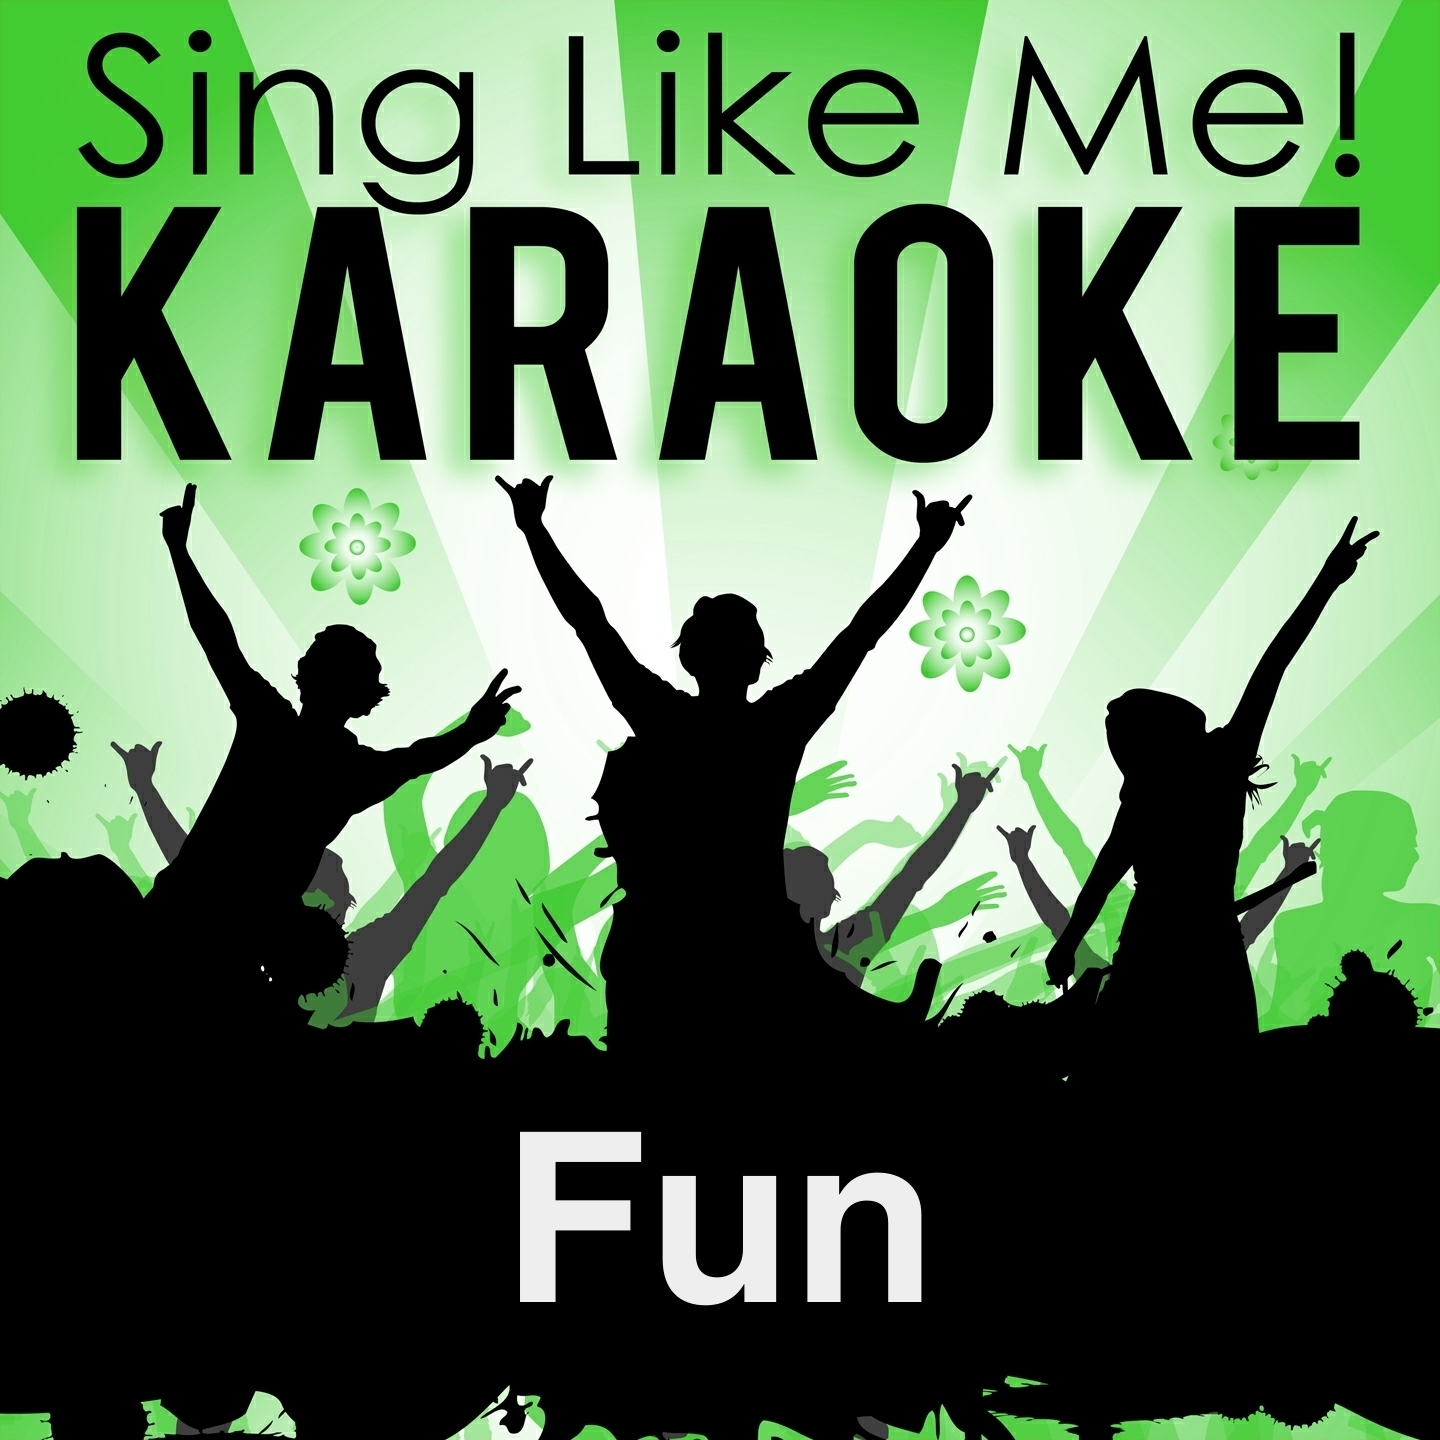 Fun (Karaoke Version with Guide Melody) (Originally Performed By Pitbull & Chris Brown)